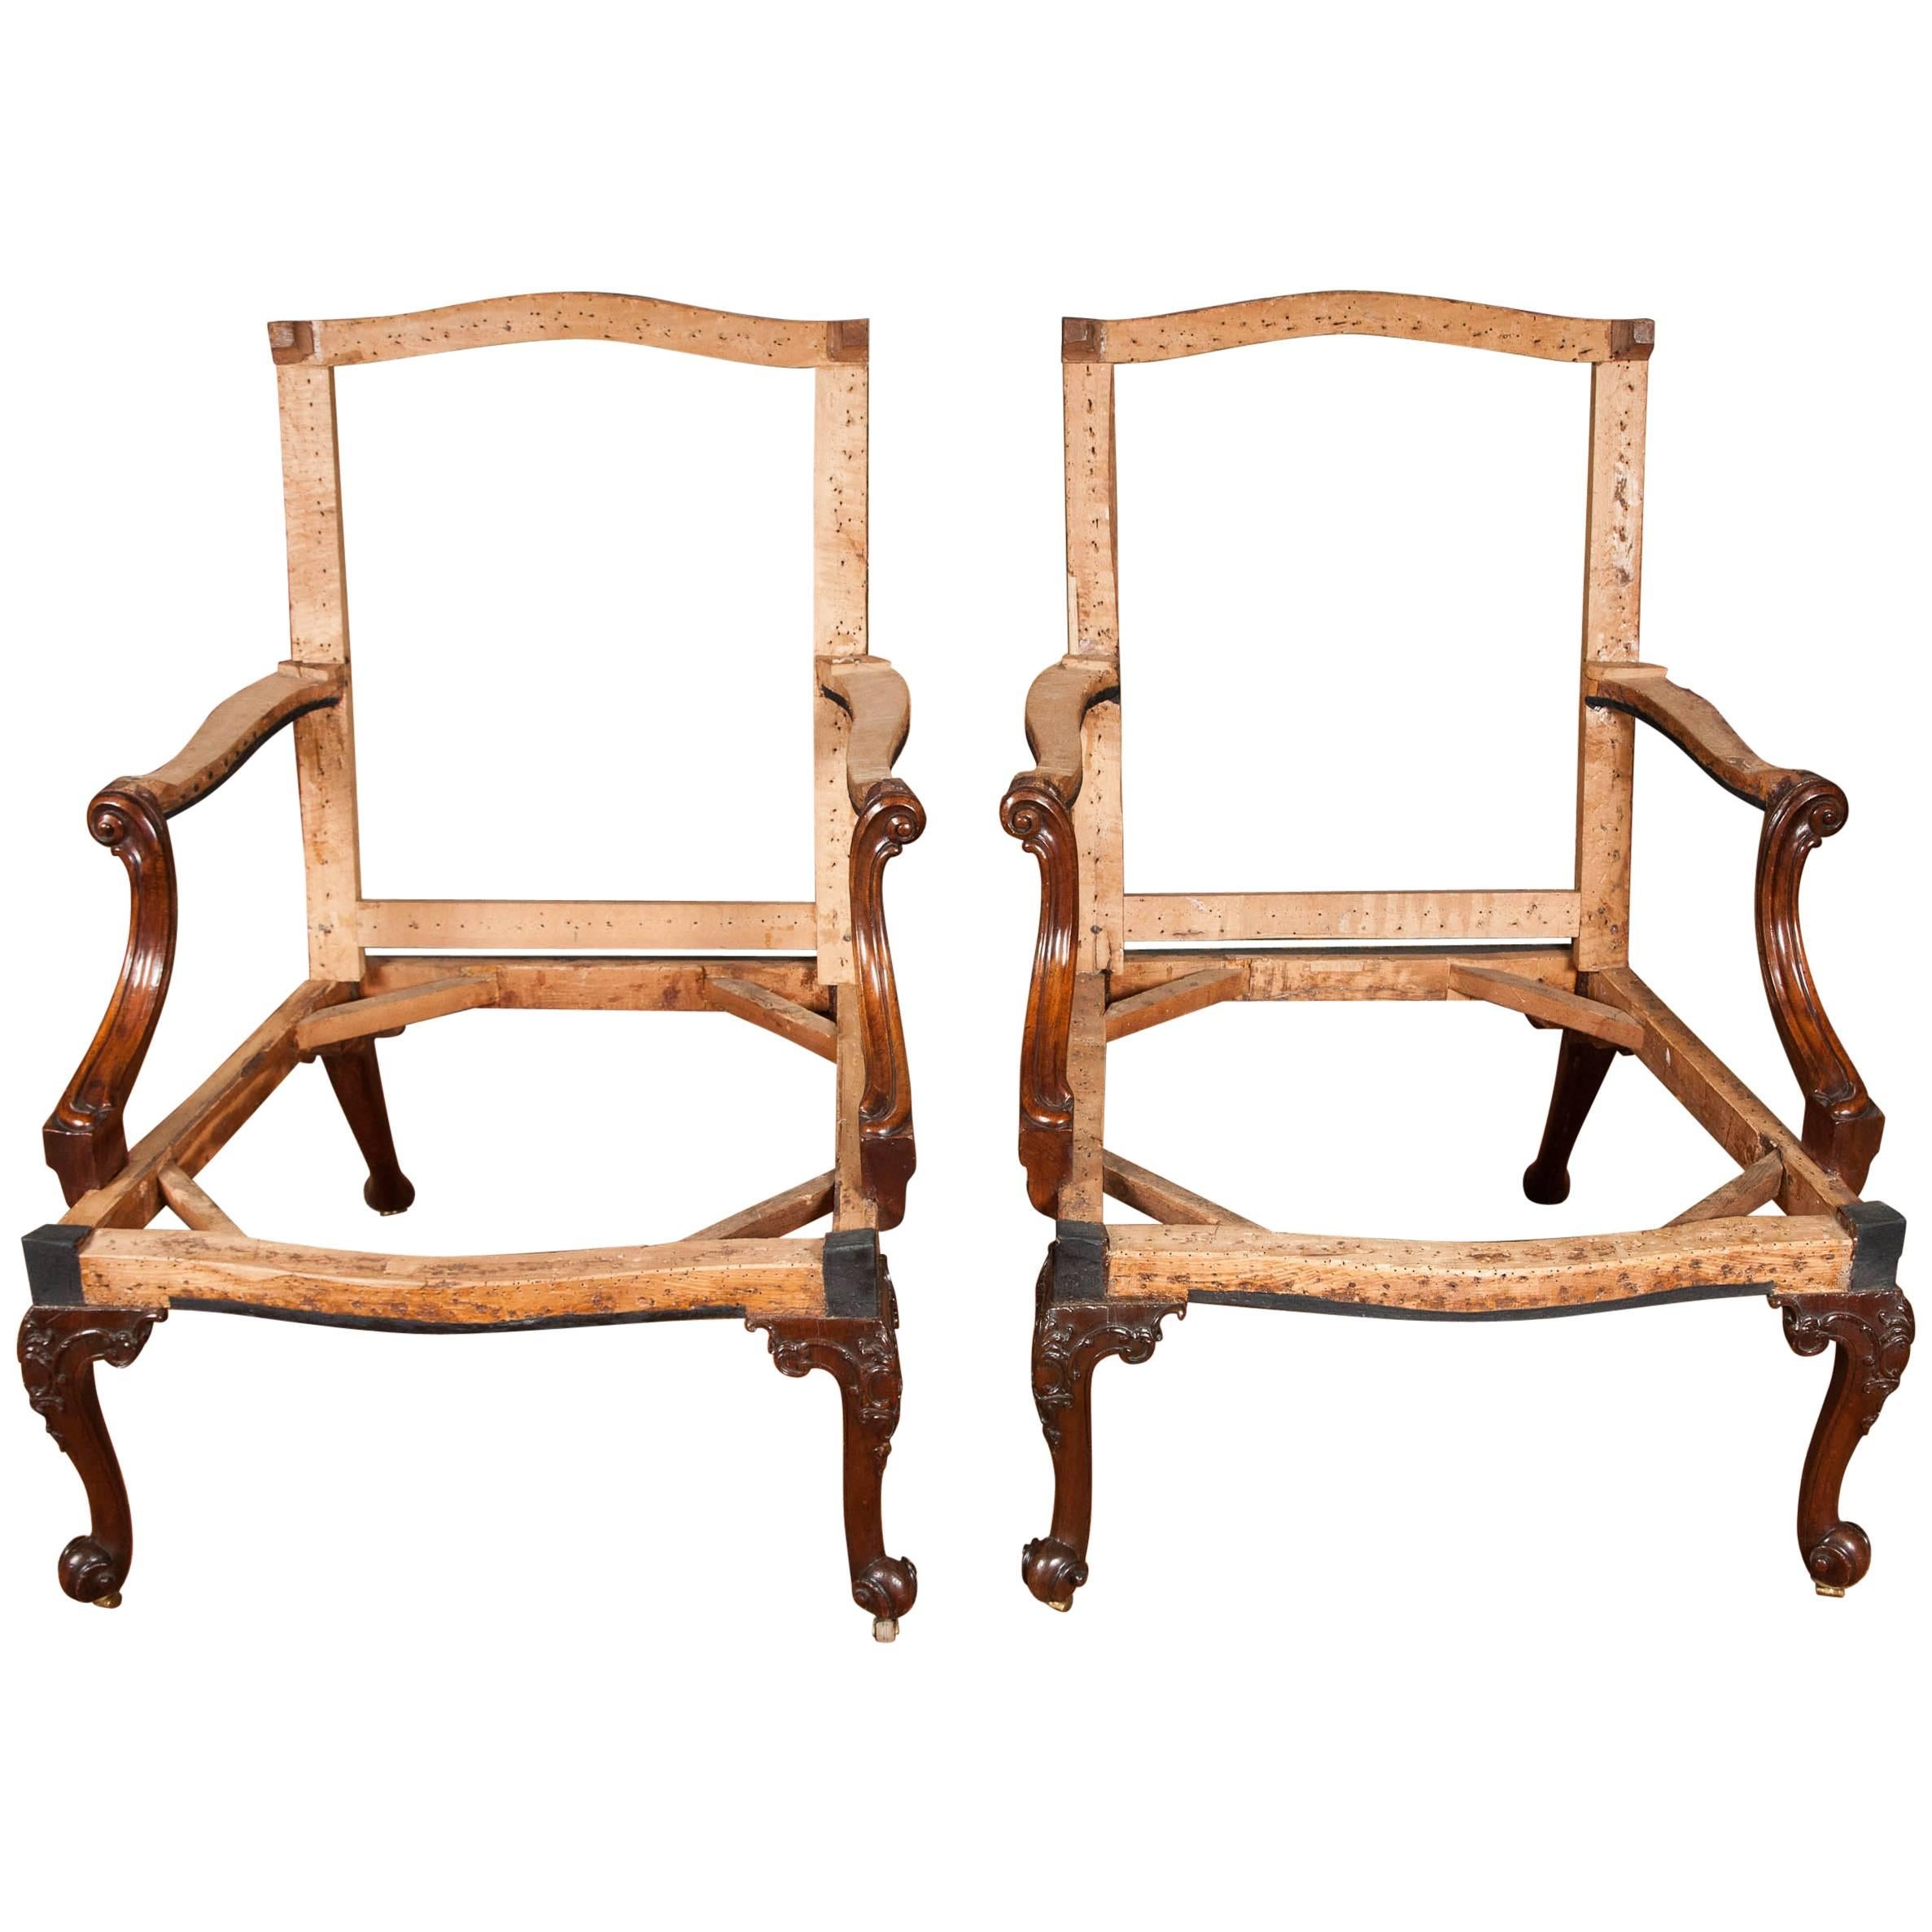 Exceptionally Fine Pair of 18th Century George III Mahogany Gainsborough Chairs